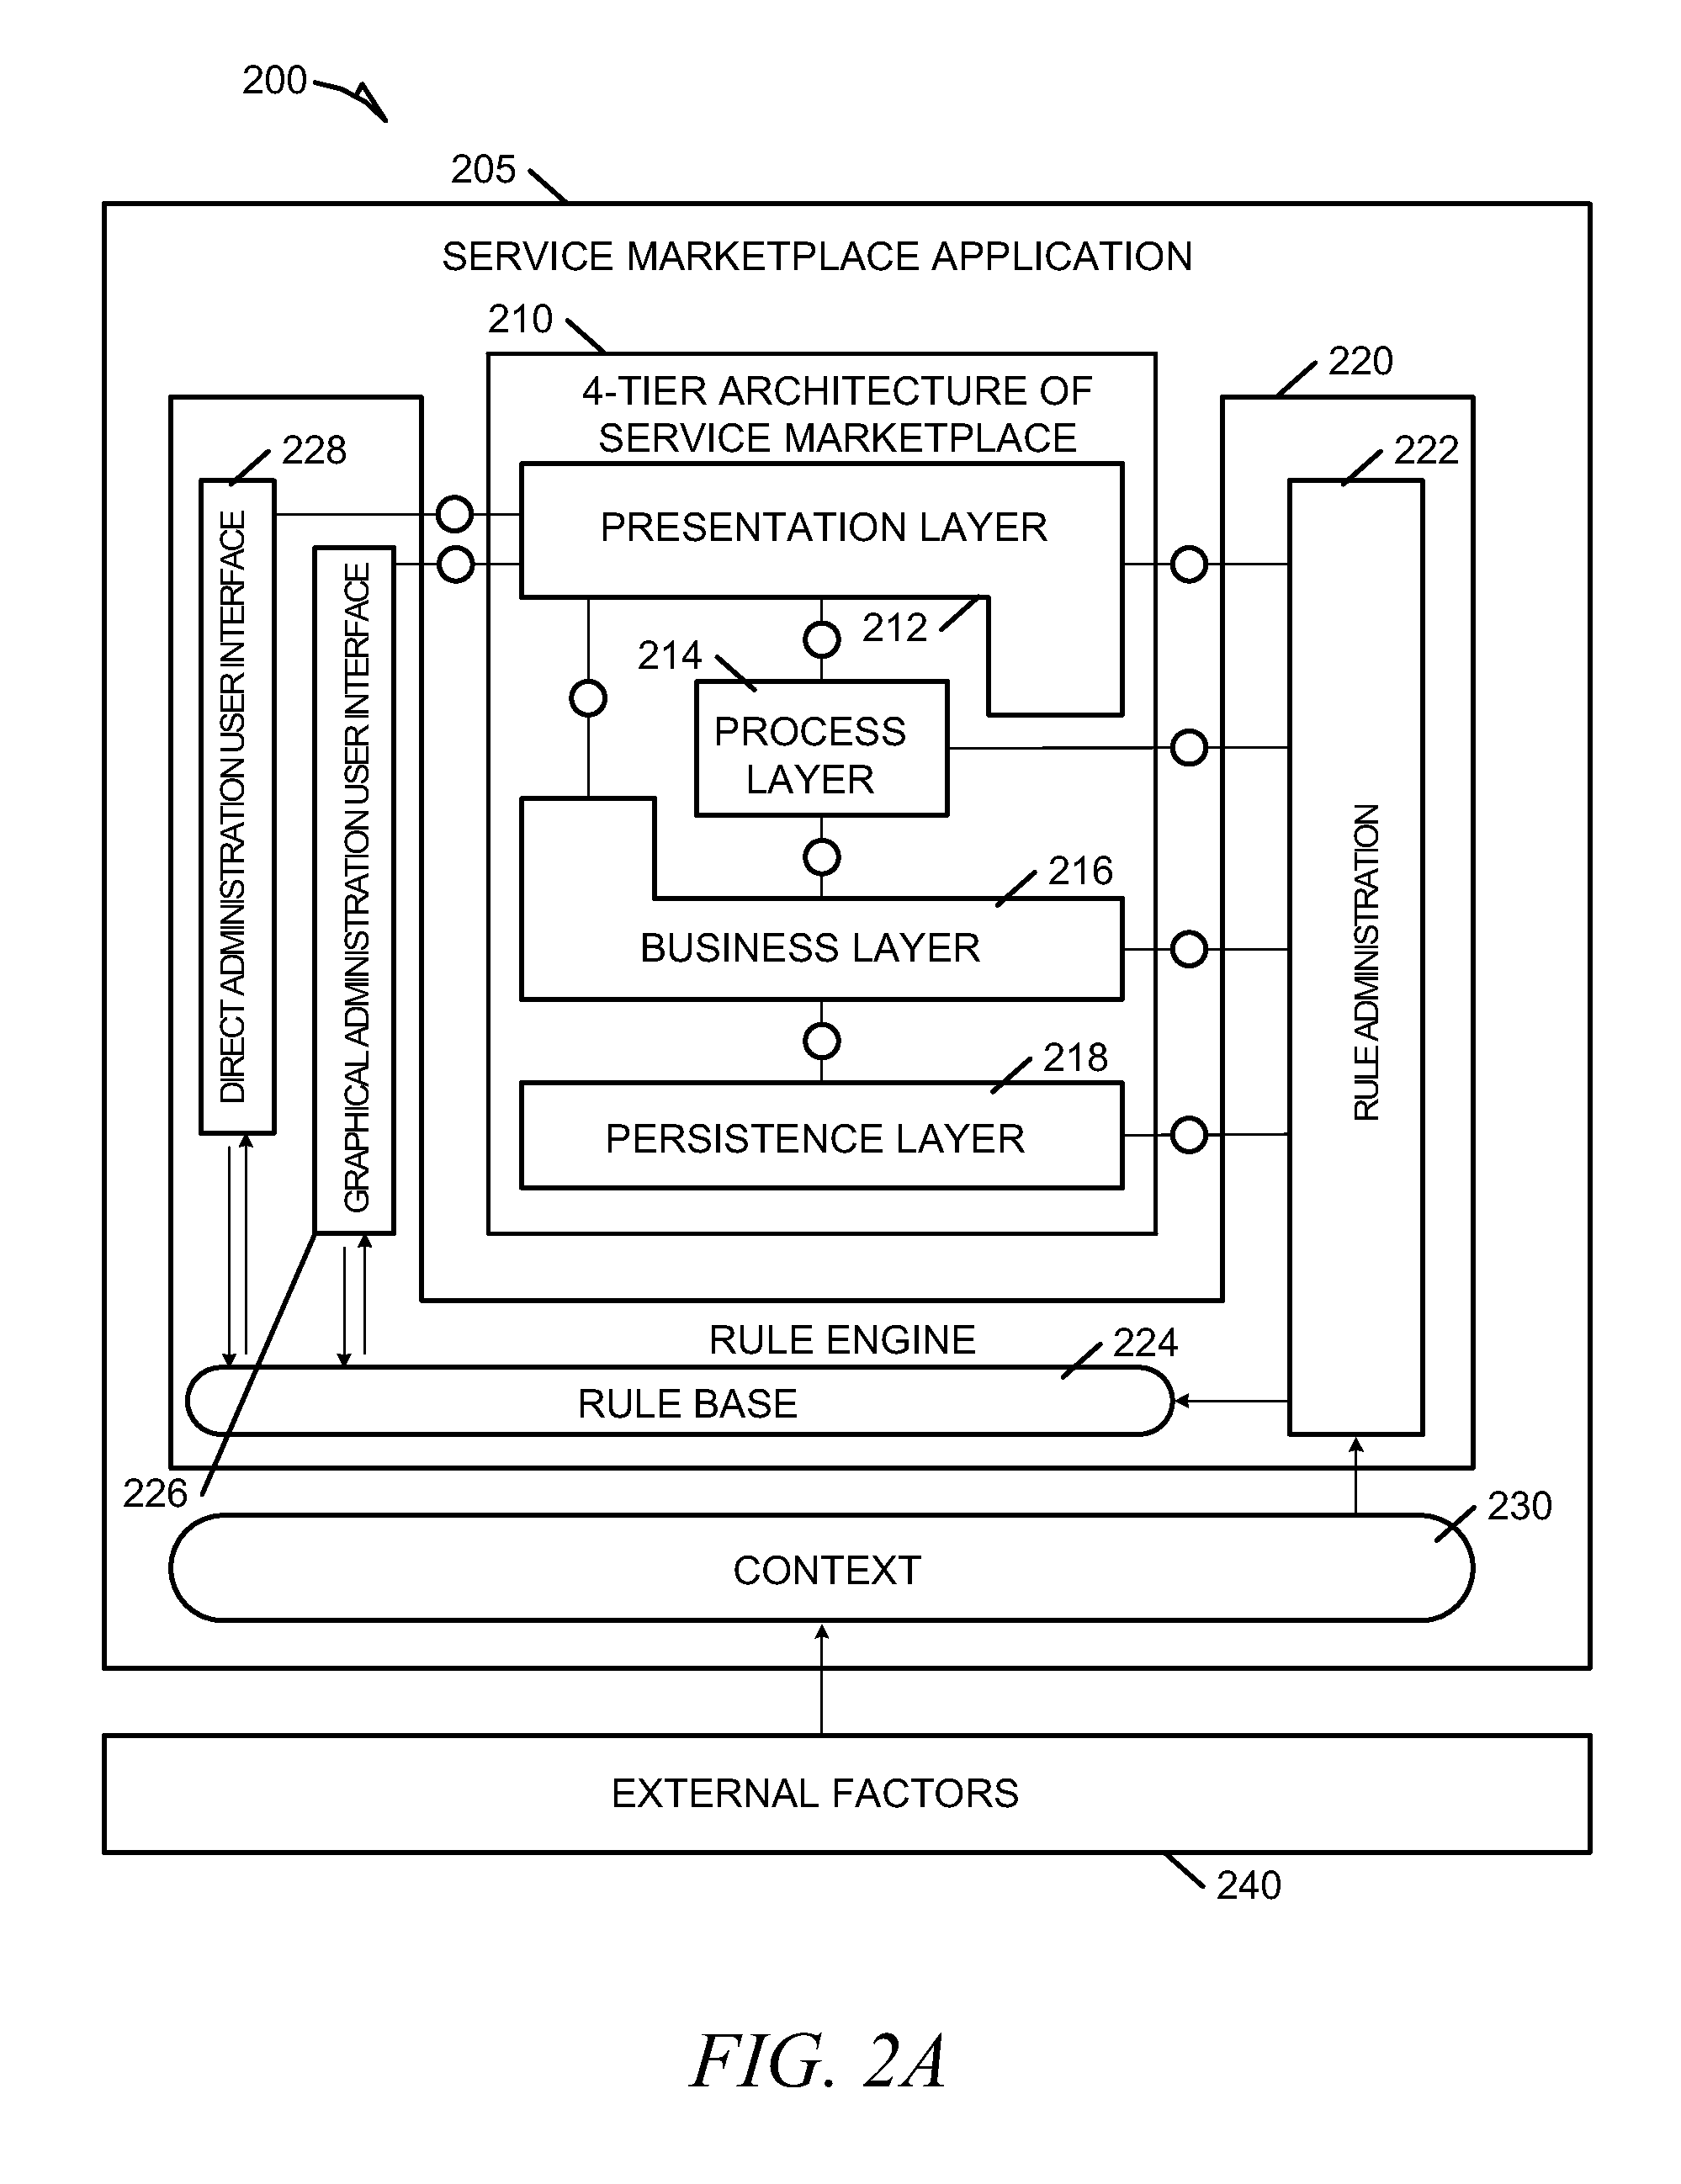 Systems and methods for dynamic process model reconfiguration based on process execution context